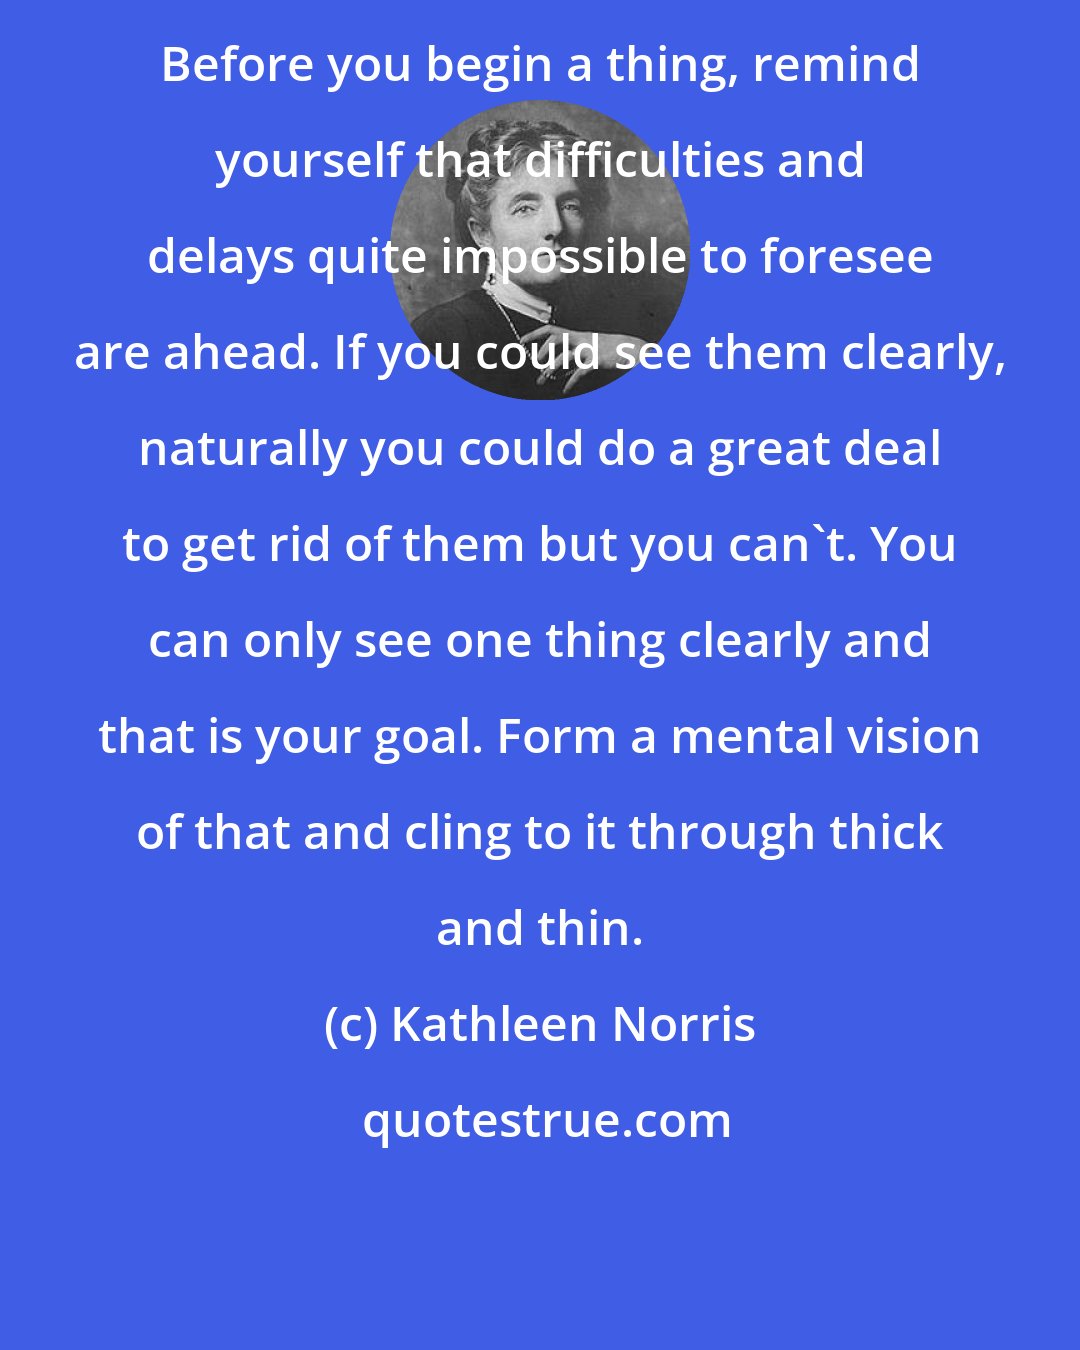 Kathleen Norris: Before you begin a thing, remind yourself that difficulties and delays quite impossible to foresee are ahead. If you could see them clearly, naturally you could do a great deal to get rid of them but you can't. You can only see one thing clearly and that is your goal. Form a mental vision of that and cling to it through thick and thin.